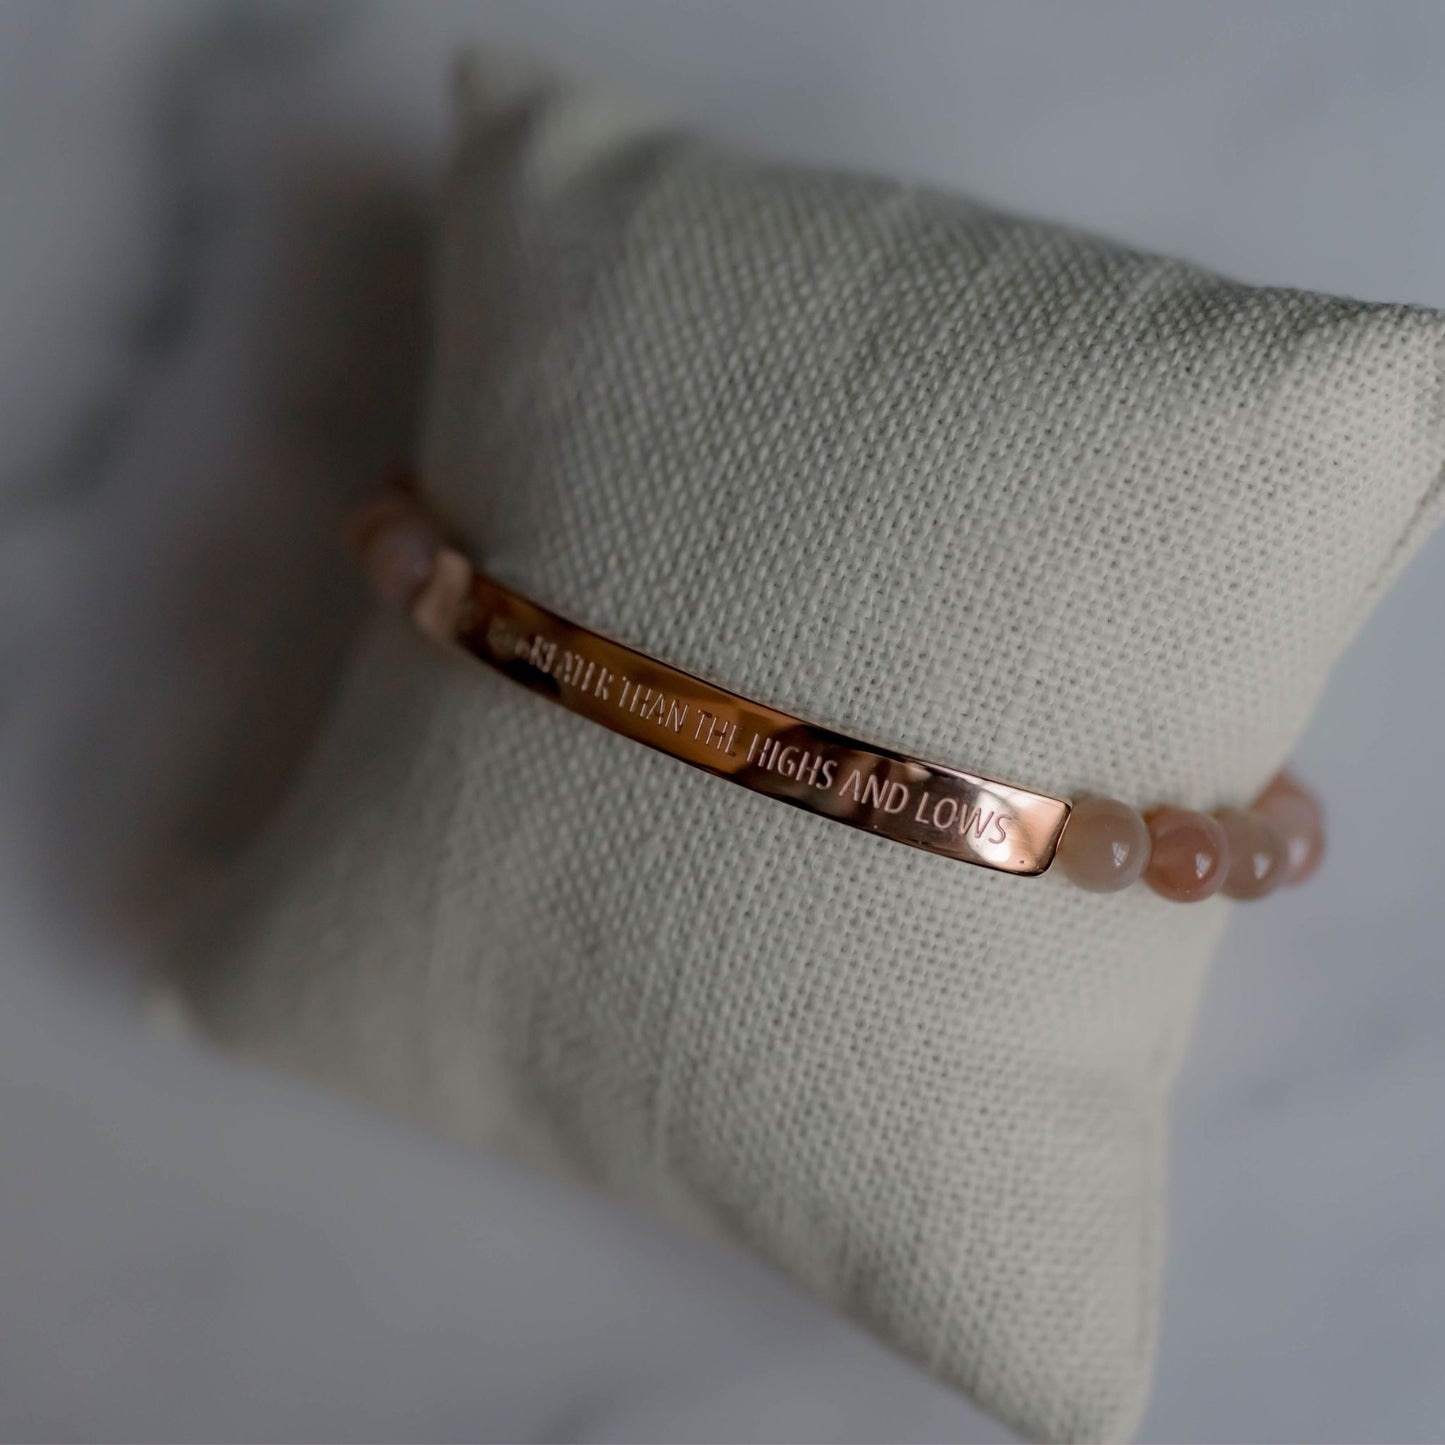 Meaningful 'God Is Greater Than The Highs And Lows' Bracelet with rose gold bar